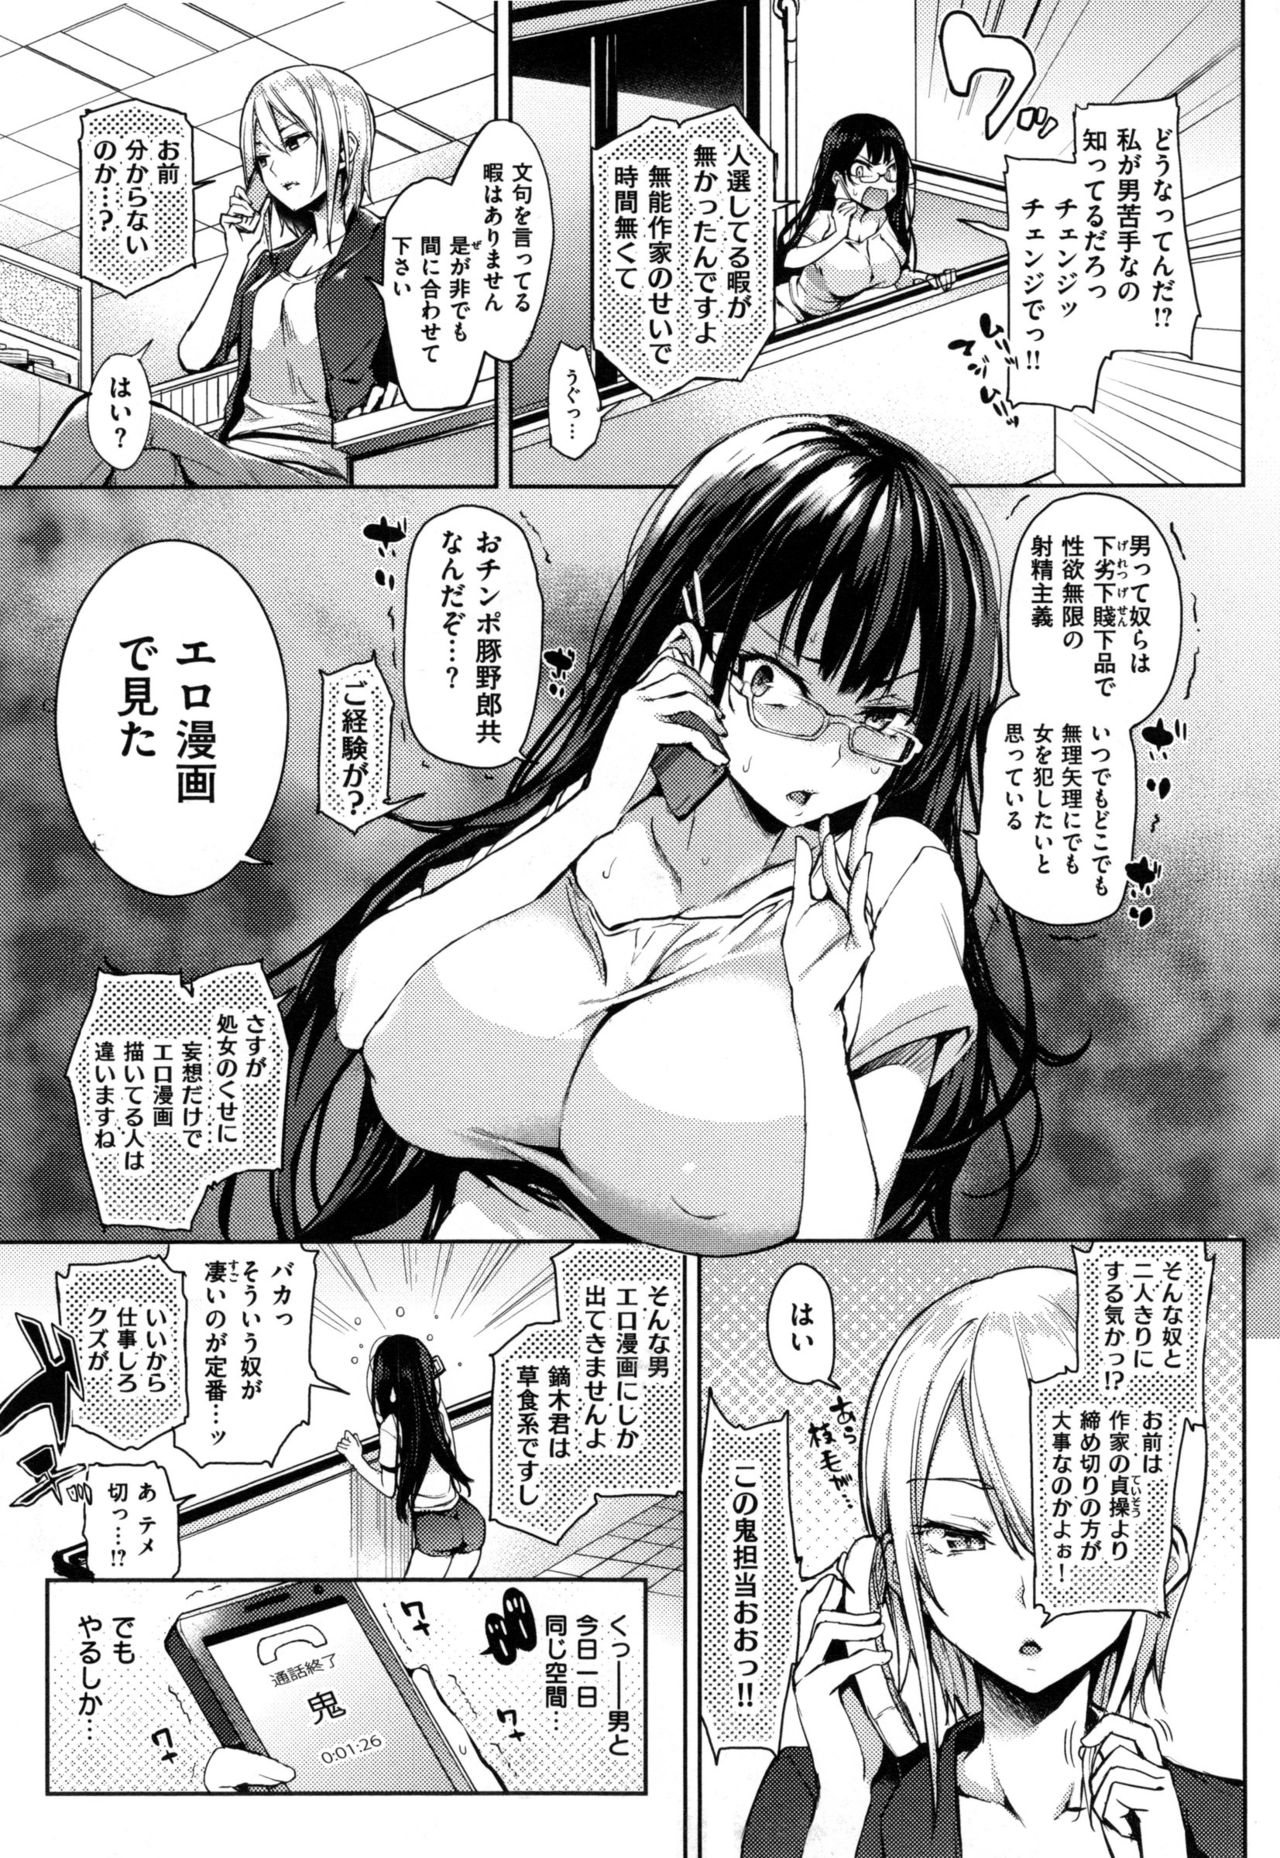 [Michiking] Shujuu Ecstasy - Sexual Relation of Master and Servant.  - page 16 full